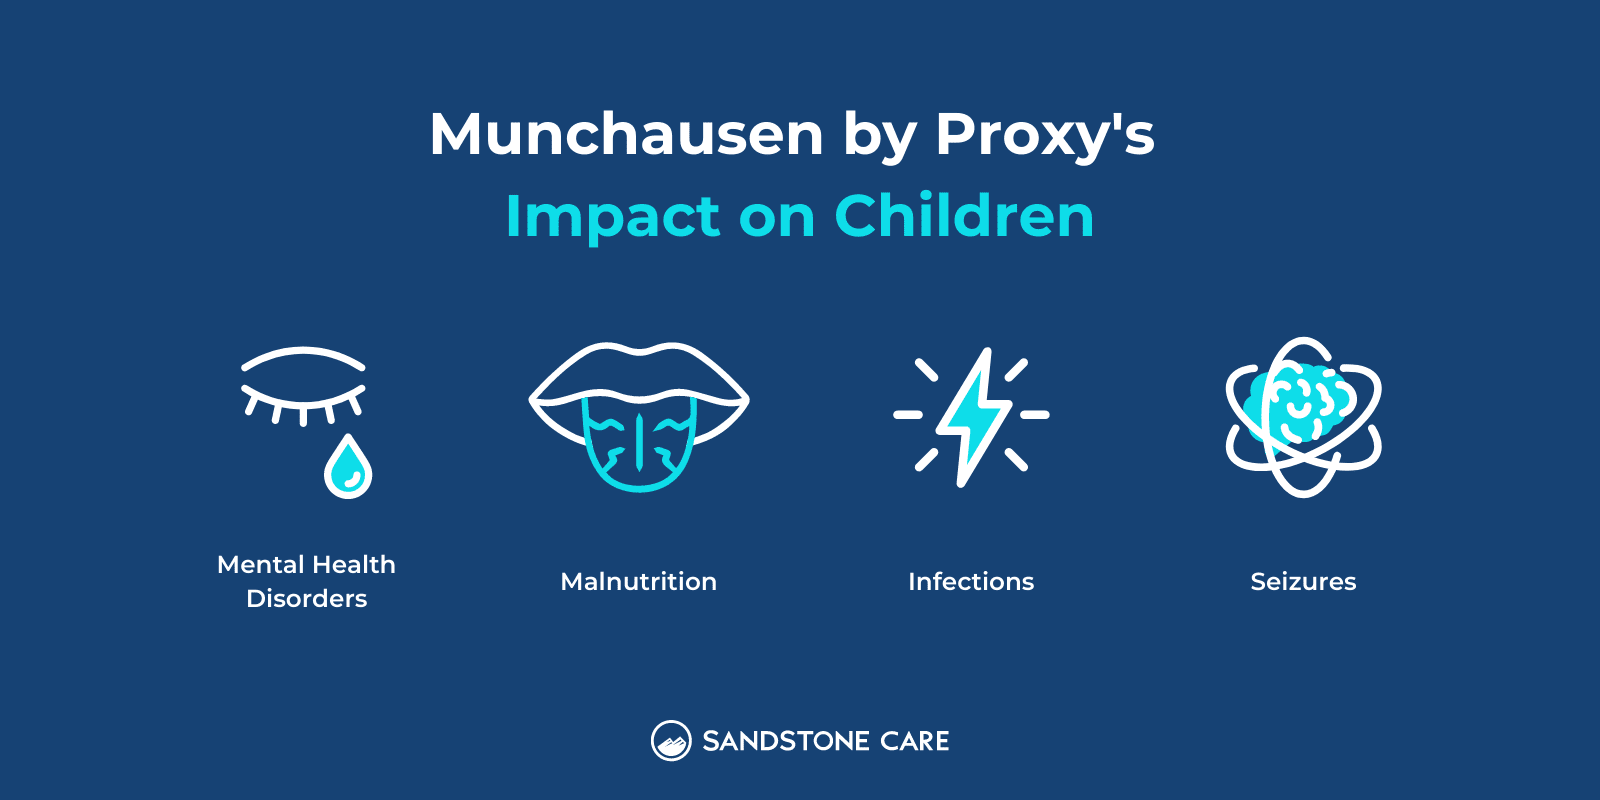 "Munchausen By Proxy's Impact On Children" written above different impacts and relevant icons for: Mental health disorders, malnutrition, infections, seizures